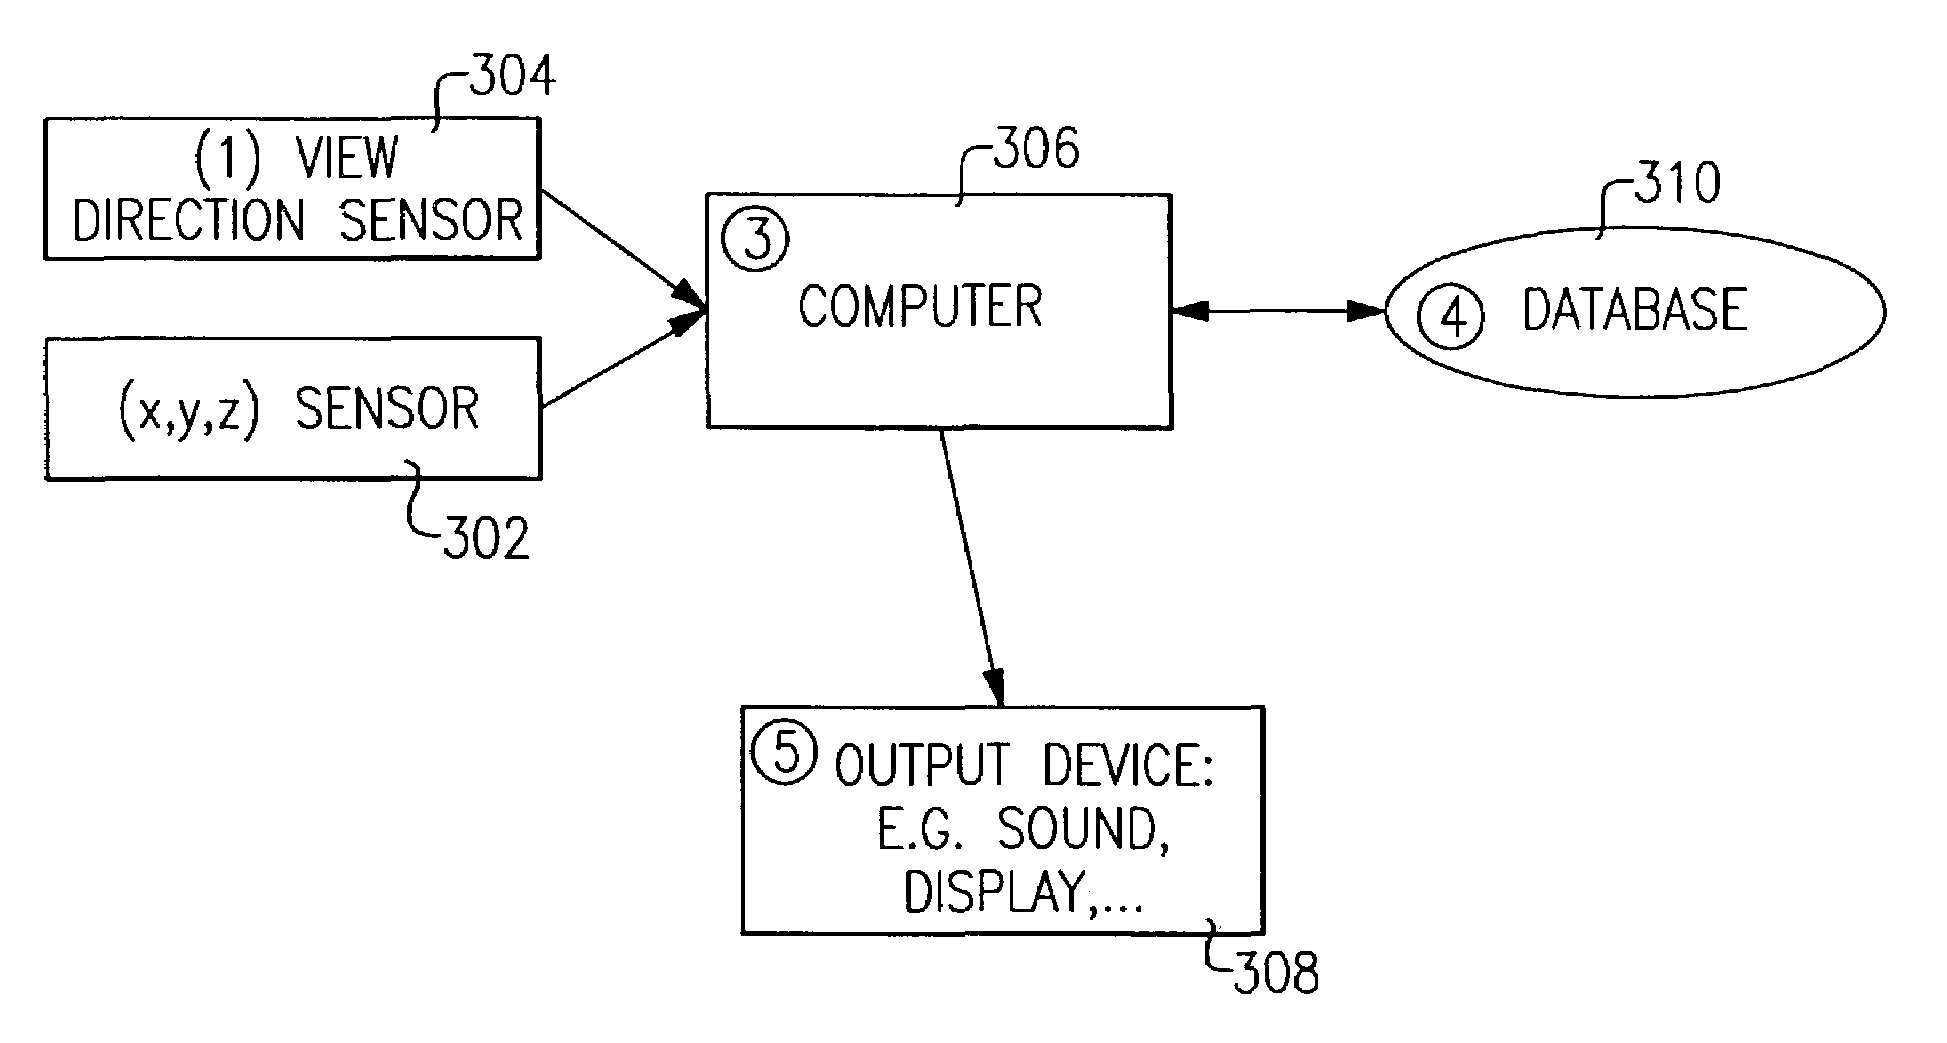 Method and apparatus for retrieving information about an object of interest to an observer